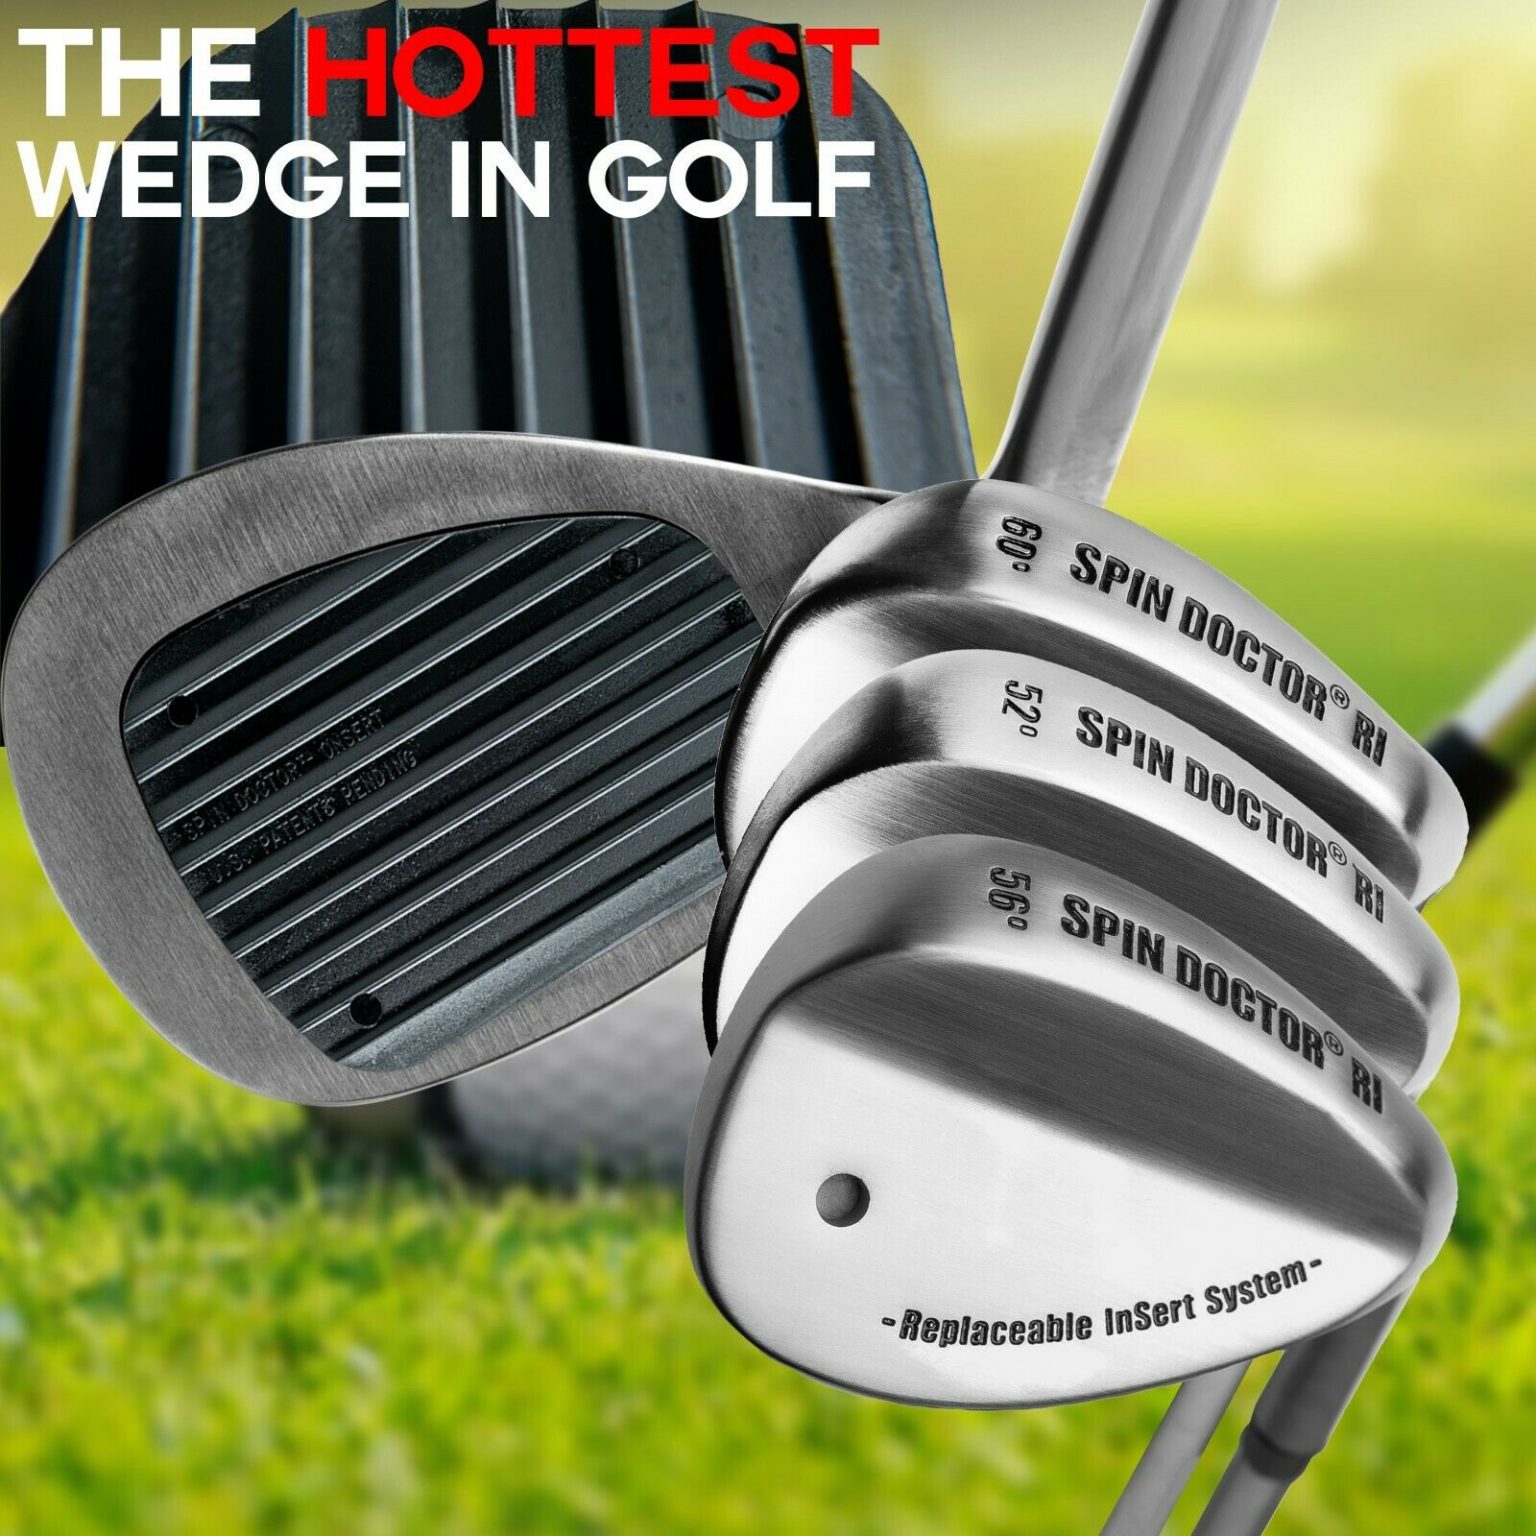 Spin Doctor Golf Wedge | Hottest Wedge in Golf | Golf Wedge